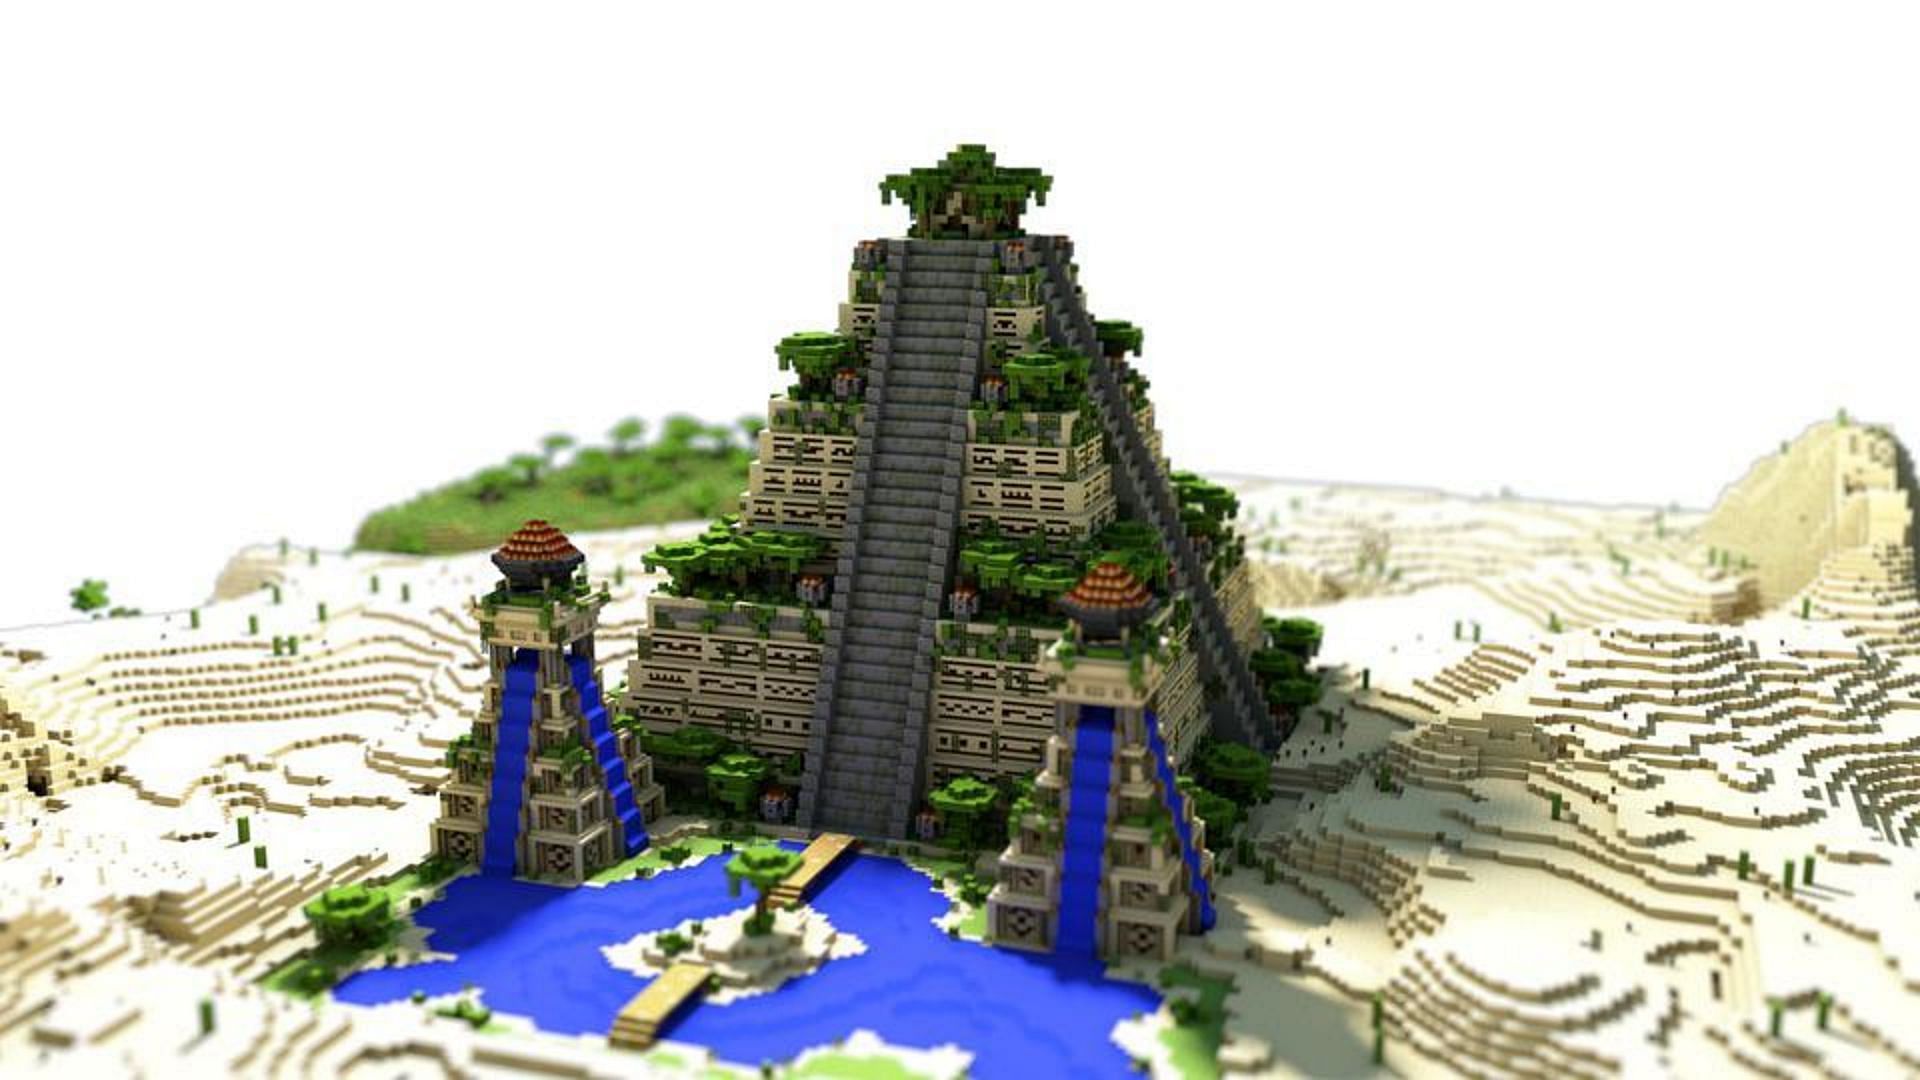 Custom pyramids can be constructed as a base in Minecraft (Image via Reddit / u/SpicyErb_)